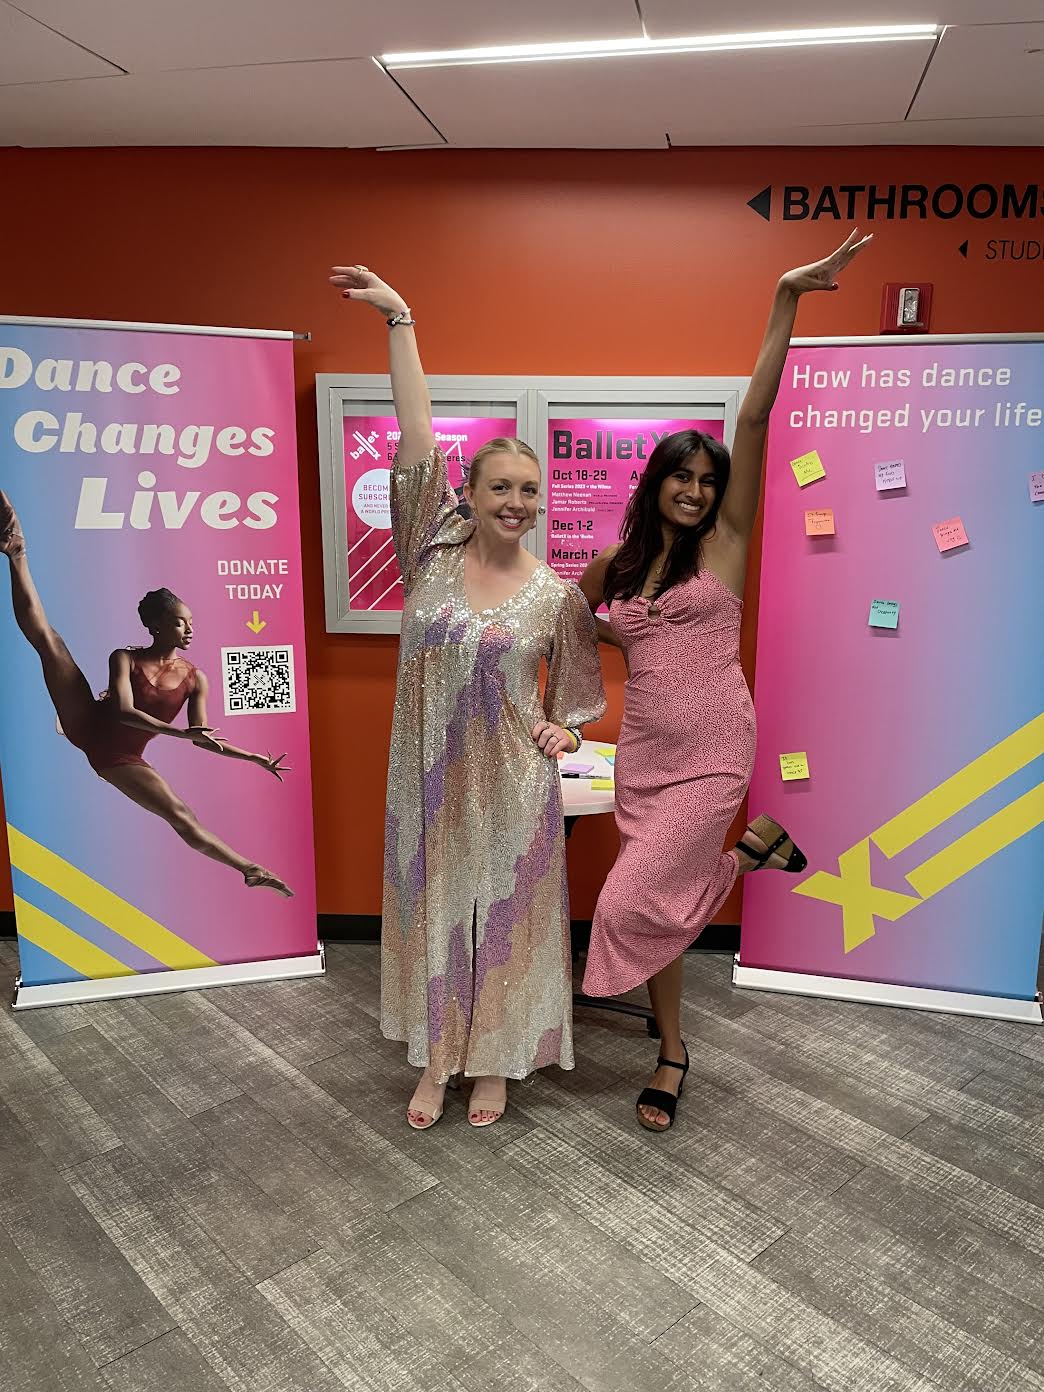 Ayesha Patel standing with another person, both of their arms raised up, in front of posters saying Dance Changes Lives and How has dance changed your life and BalletX